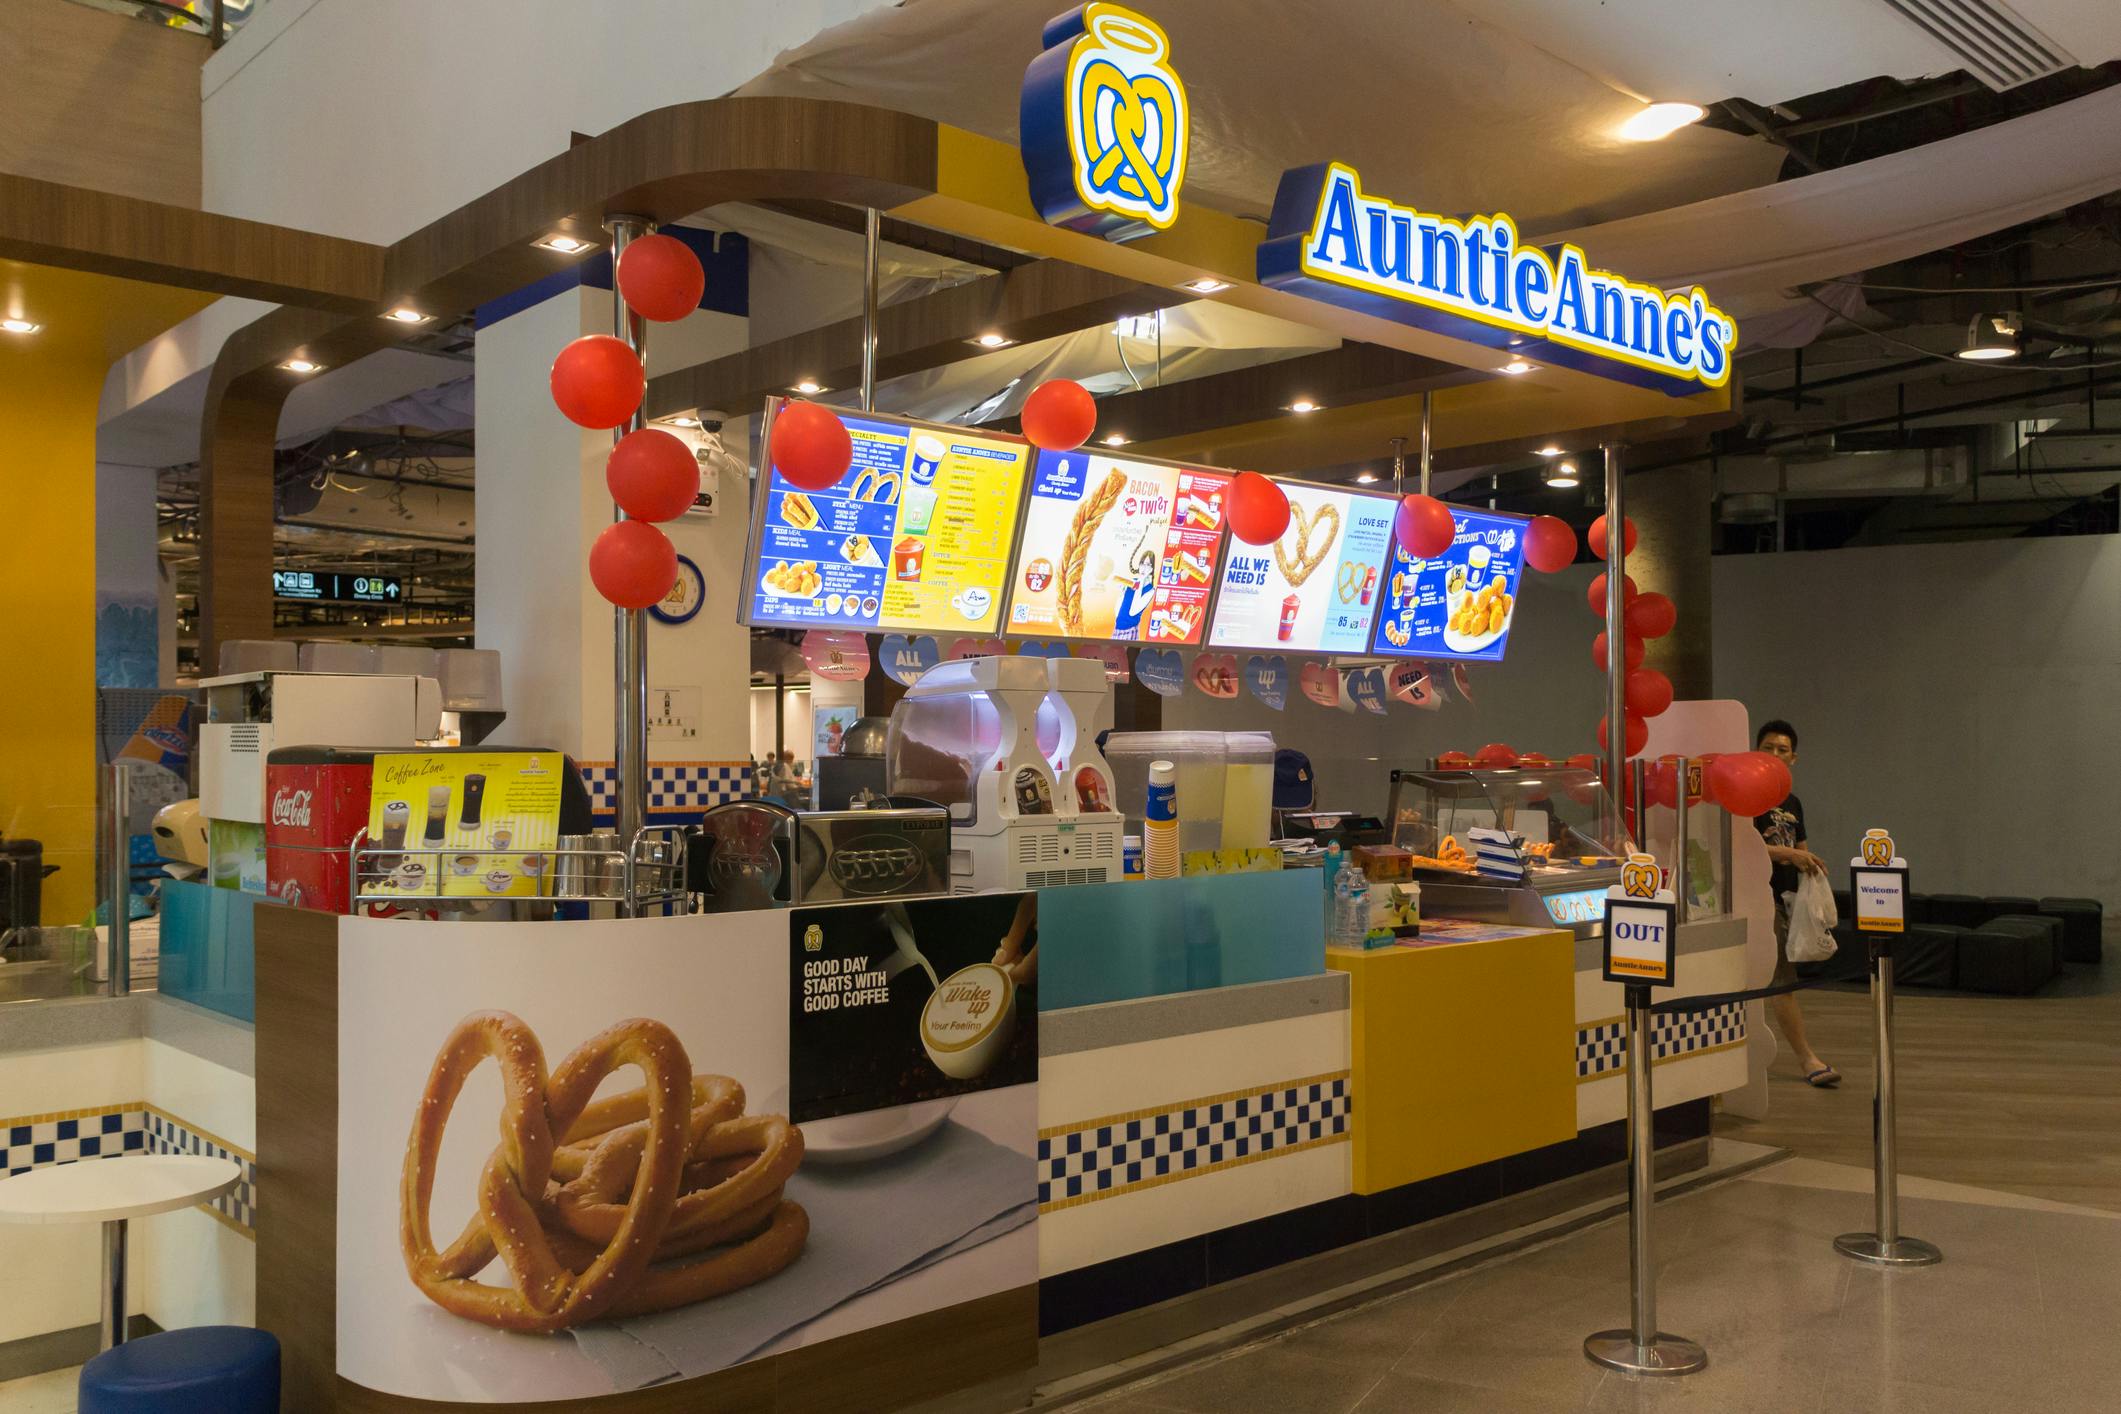 Auntie Annes storefront in a mall